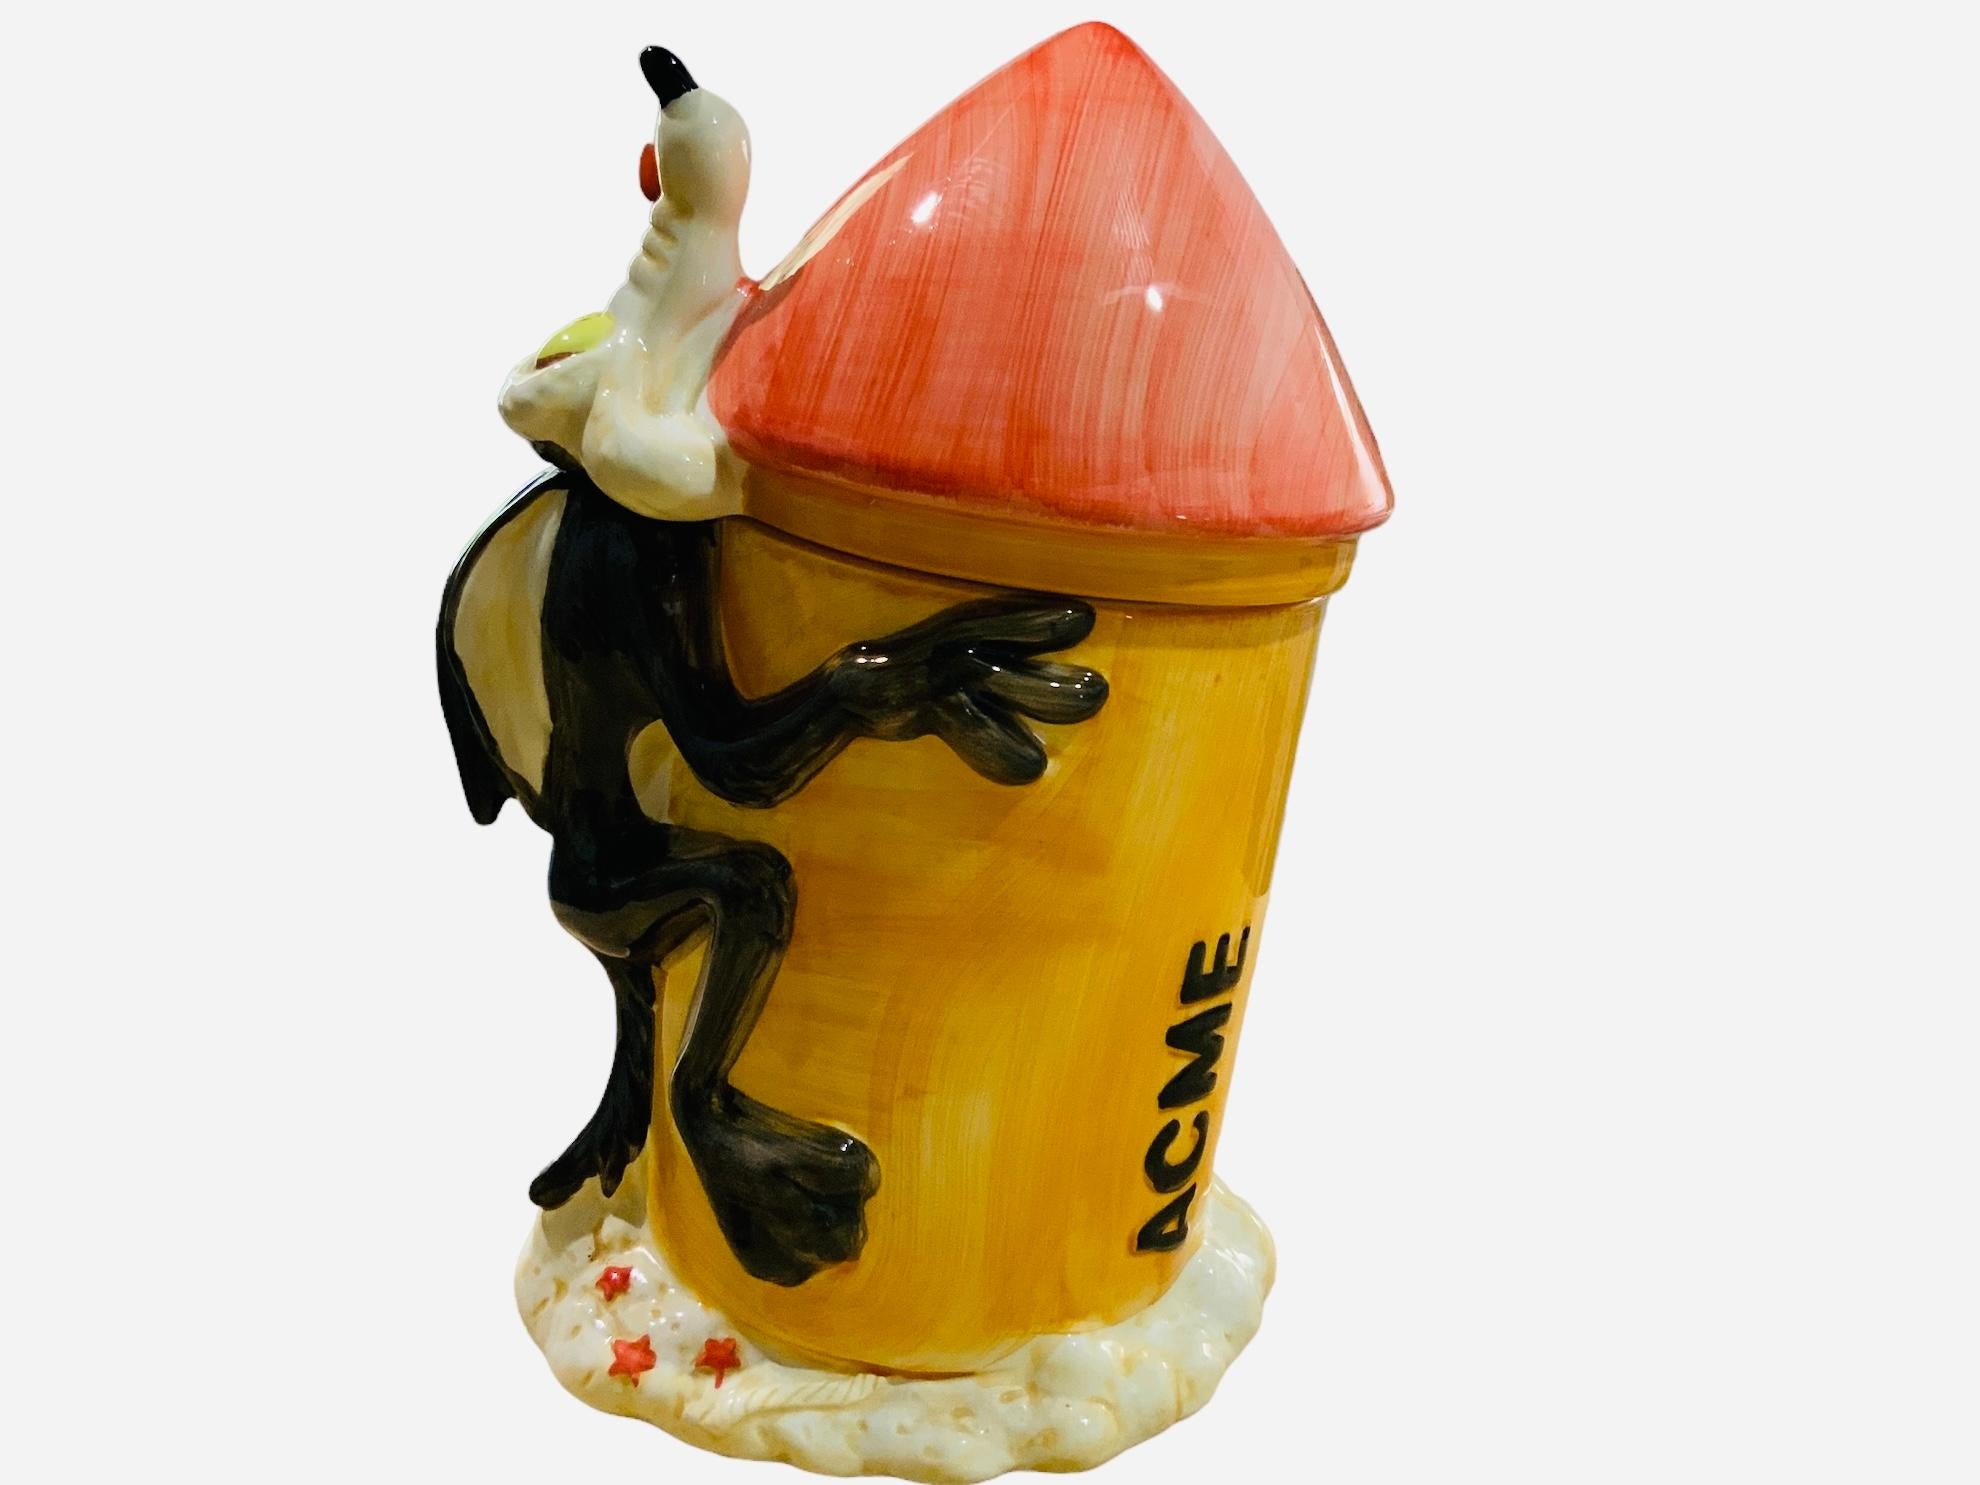 Taiwanese Warner Bros, Looney Tunes Wile E. Coyote ACME Rocket Cookie Jar For Sale